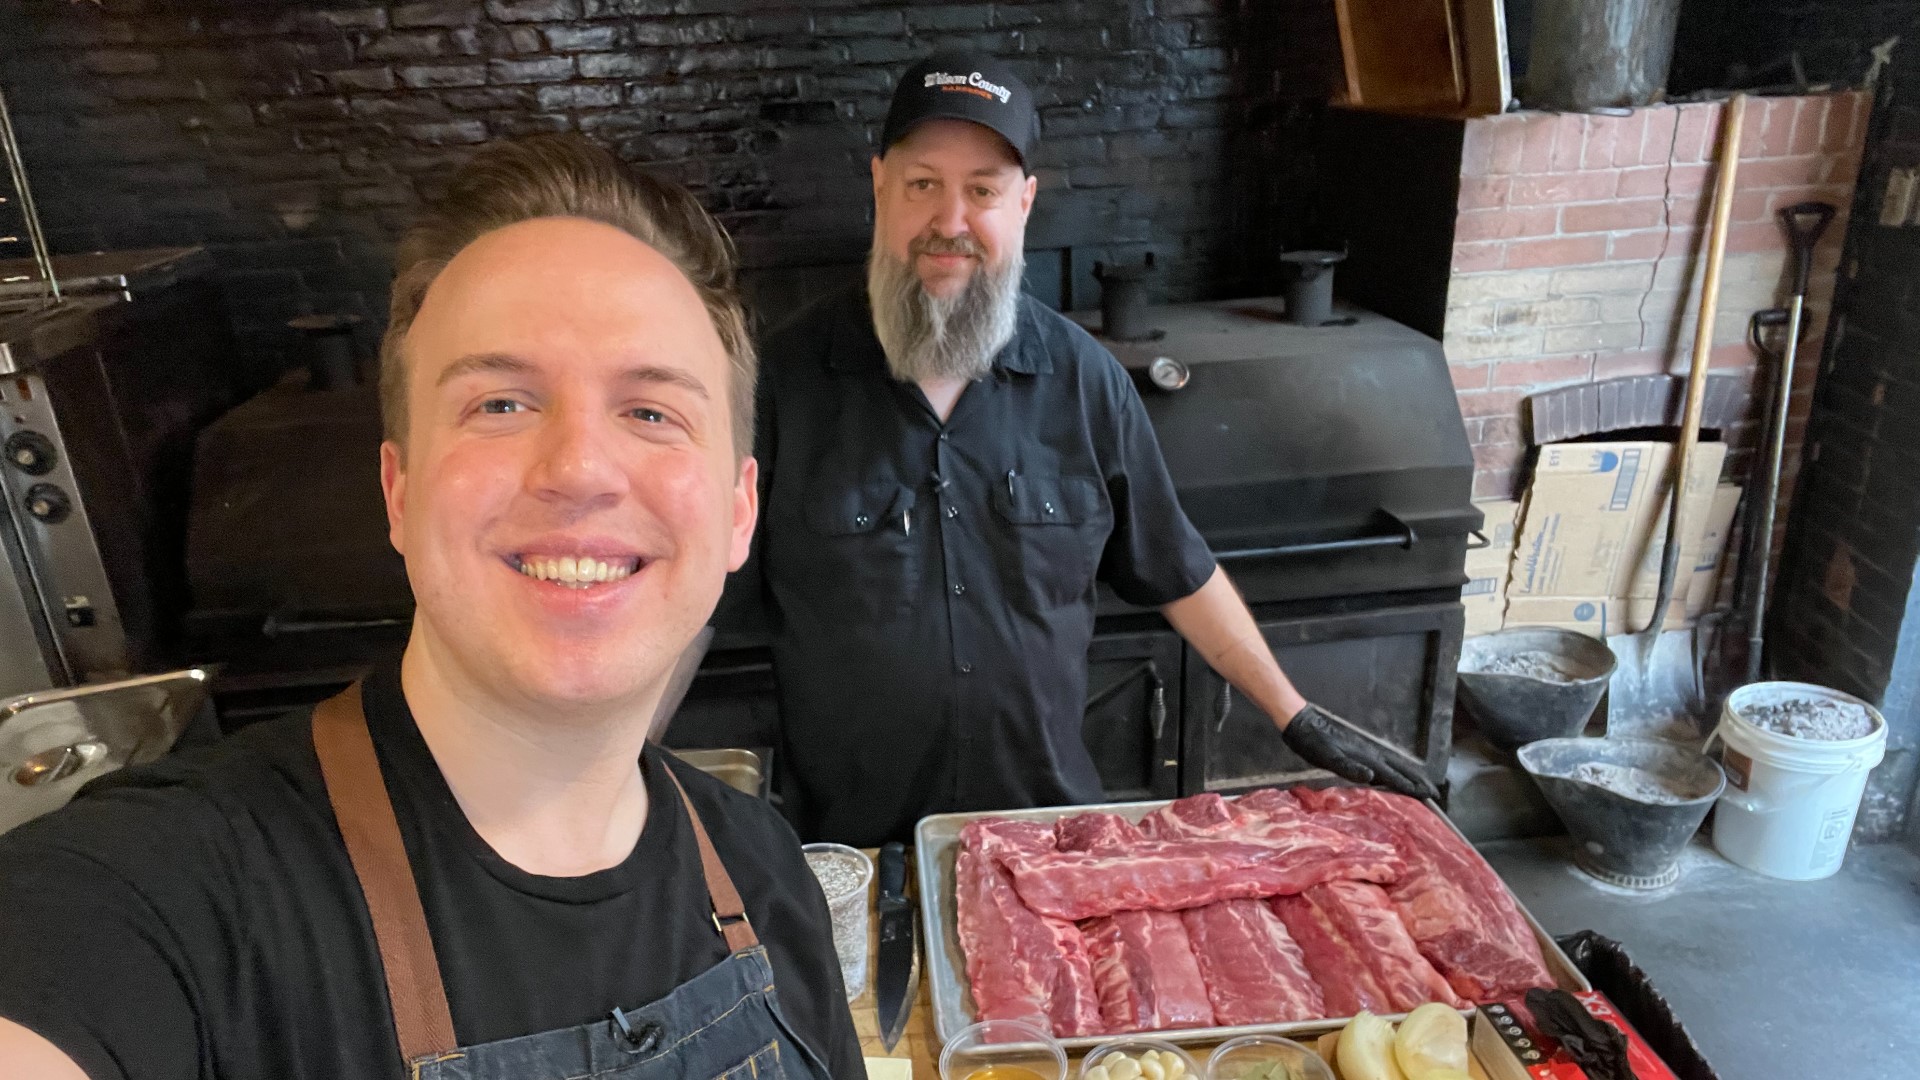 NEWS CENTER Maine Meteorologist Aaron Myler went to Wilson County Barbecue in Bayside Portland for a peek inside the smoker.